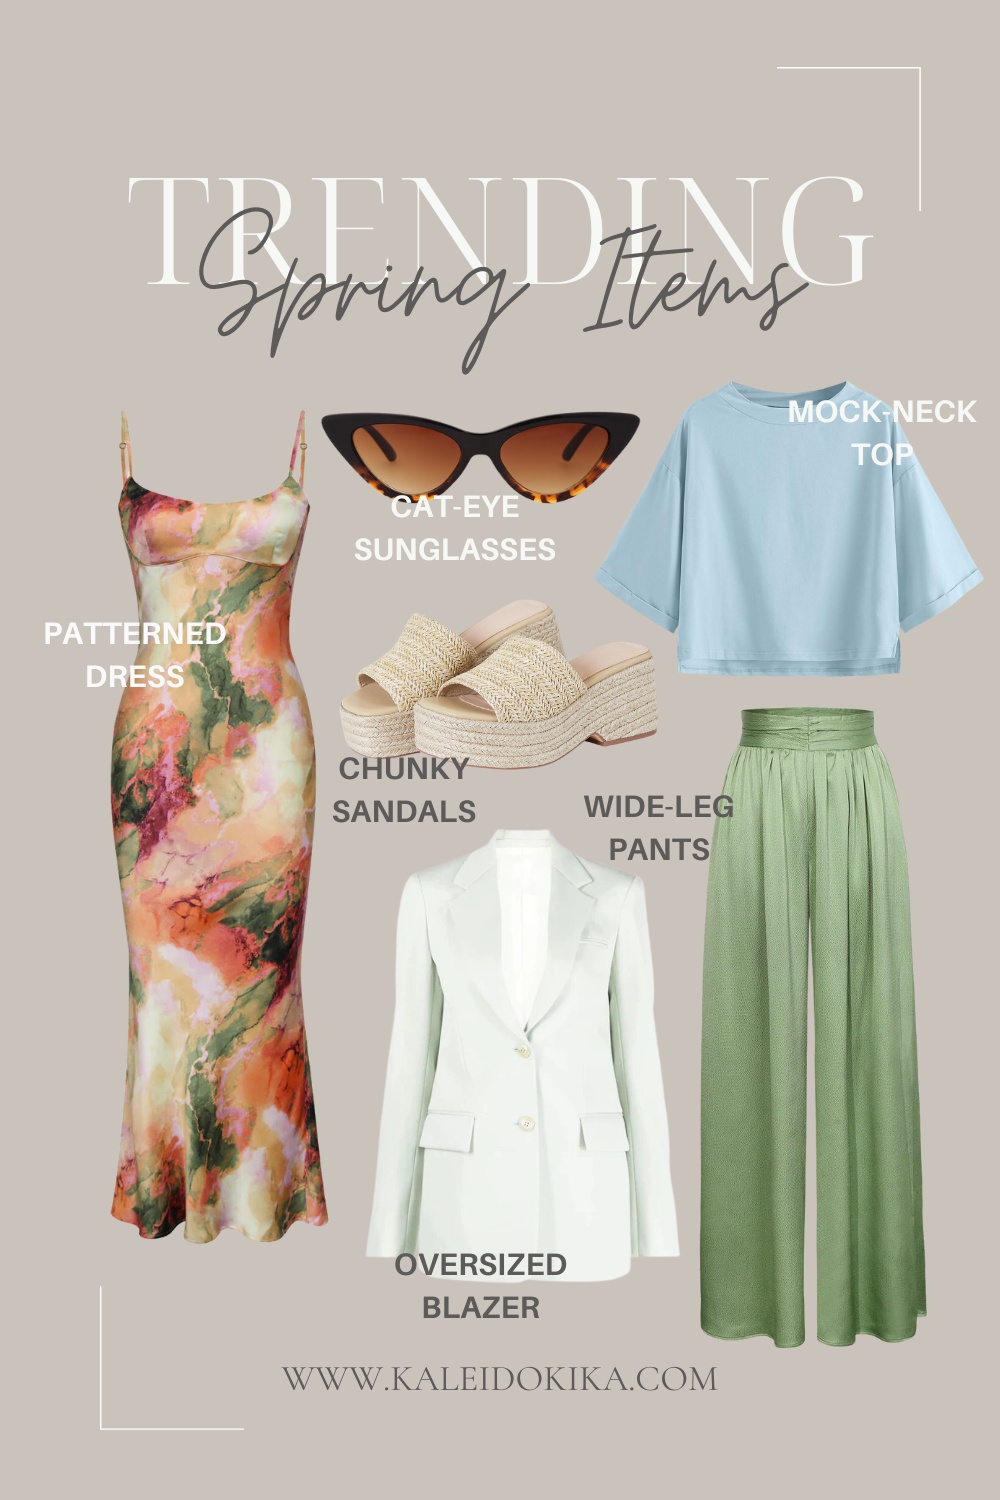 Image showing 6 trending fashion items for spring